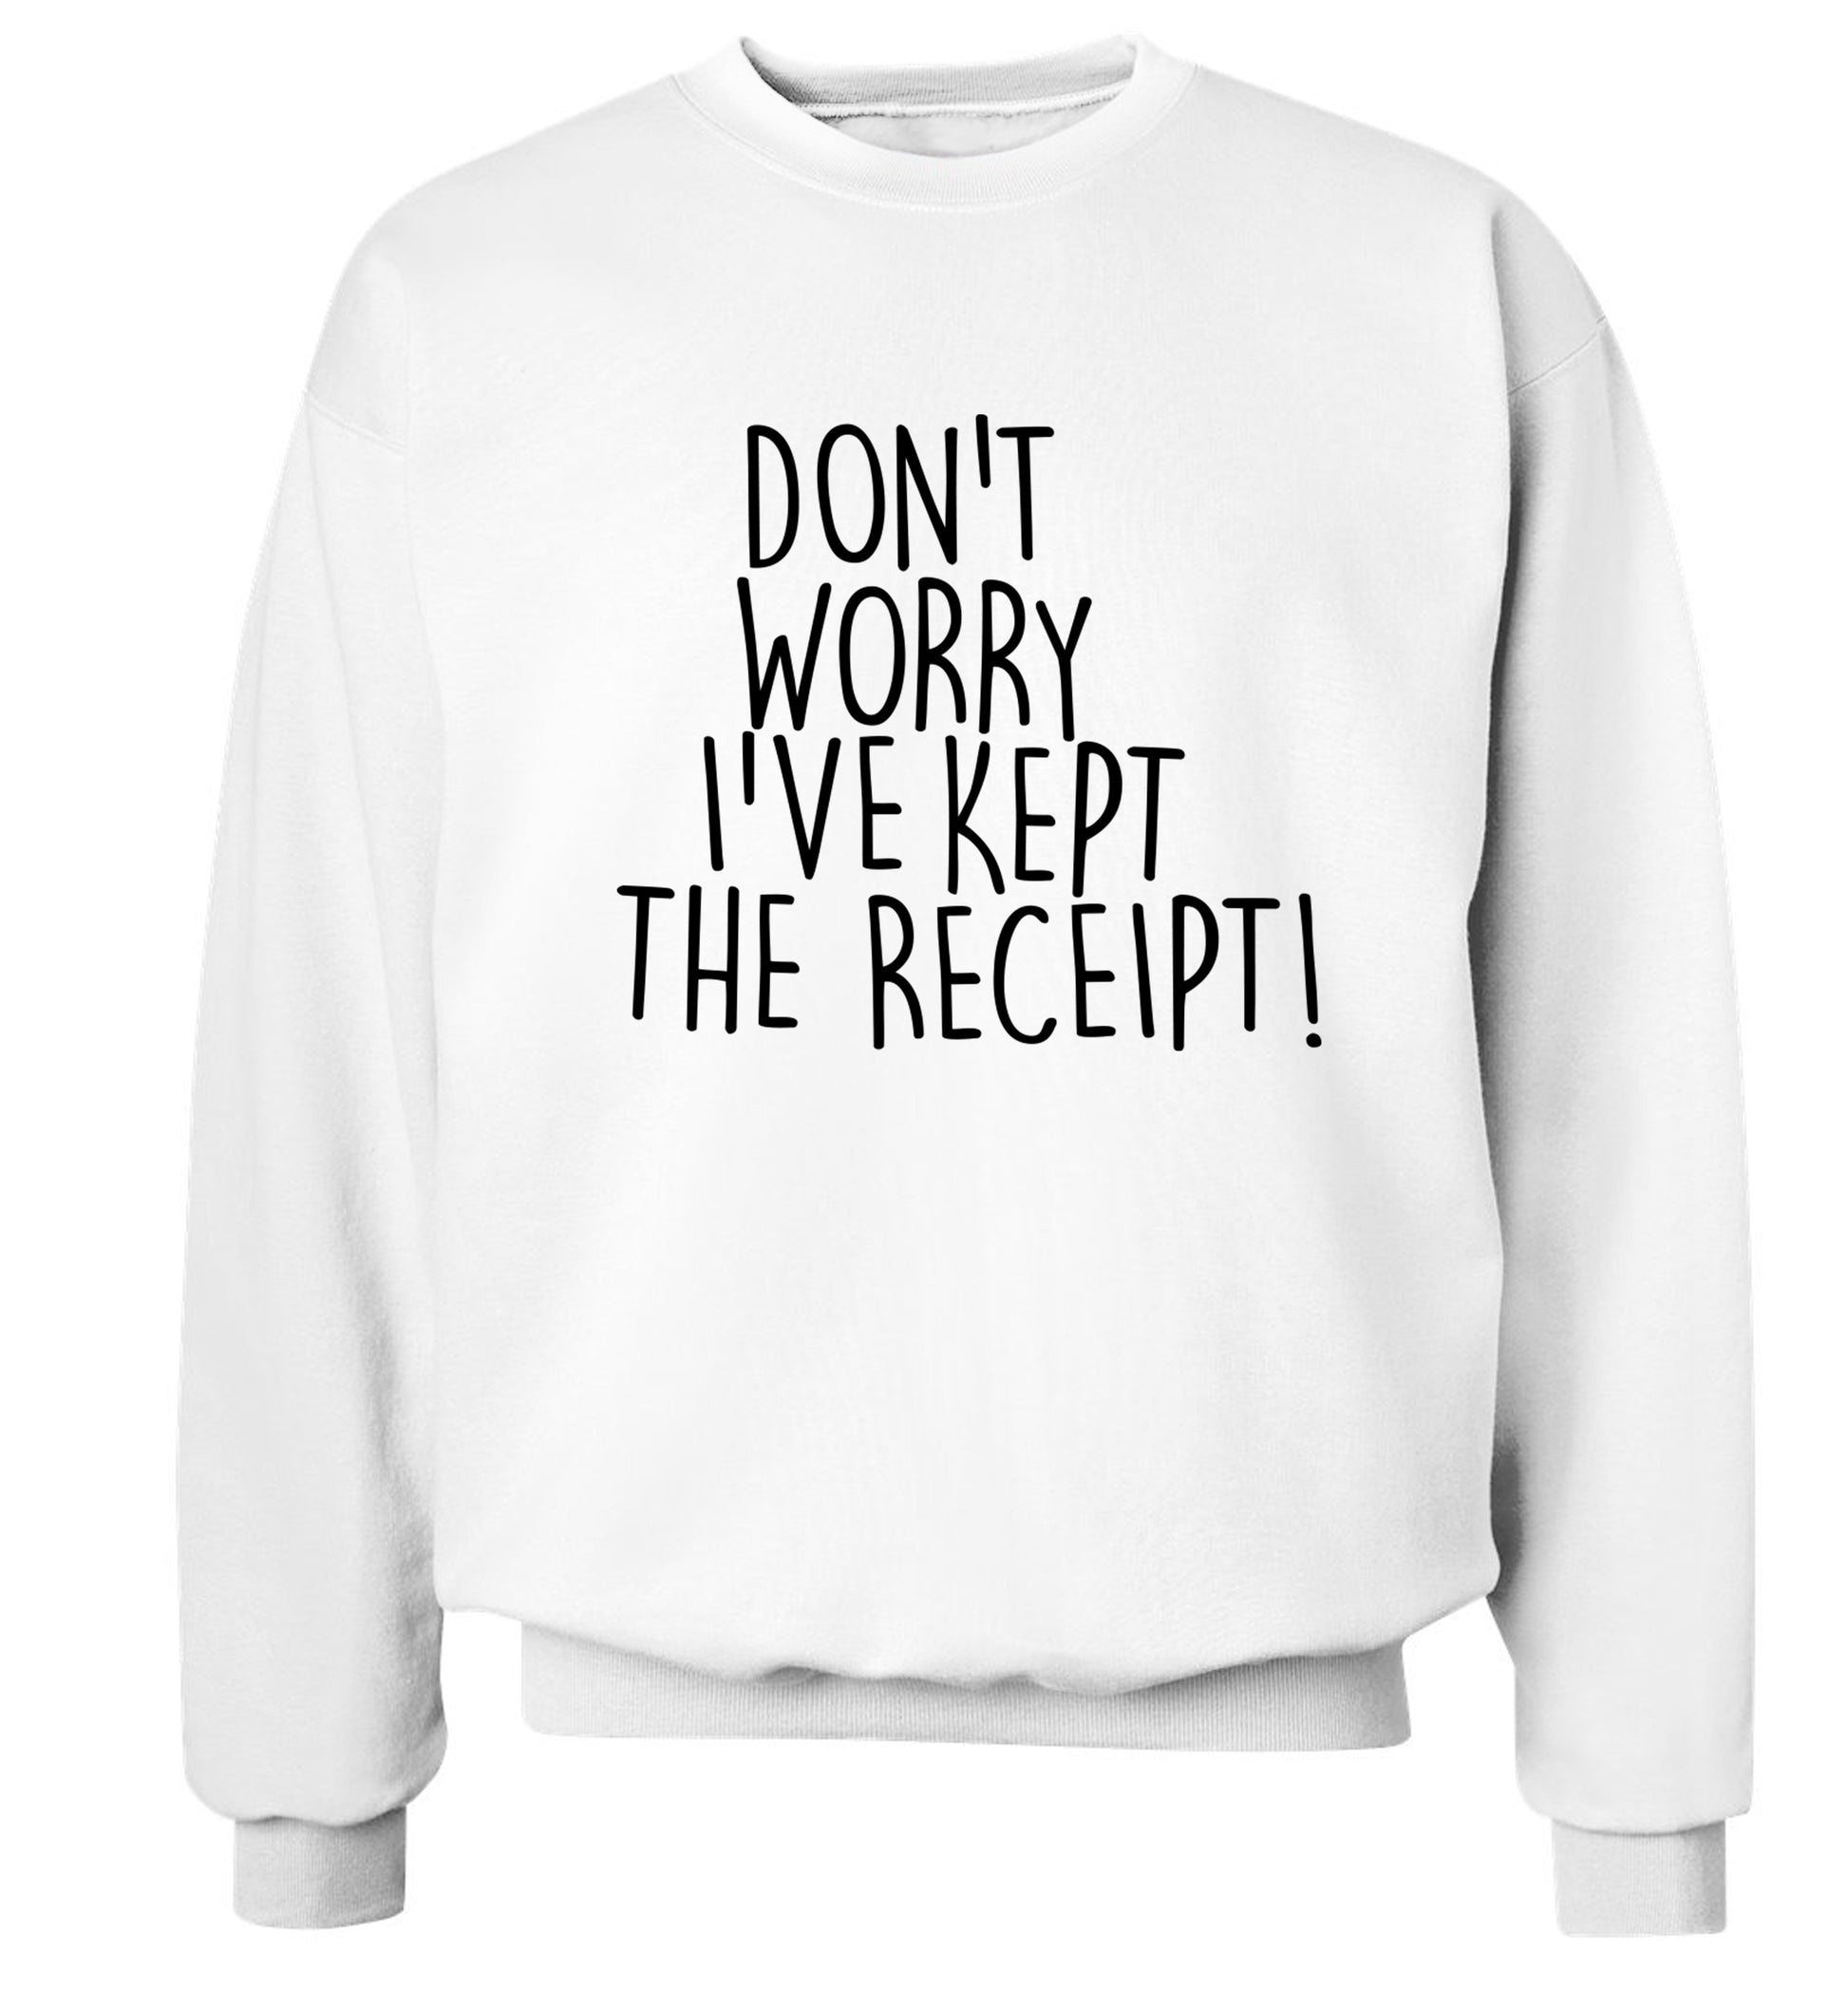 Don't Worry I've Kept the Receipt Adult's unisex white Sweater 2XL